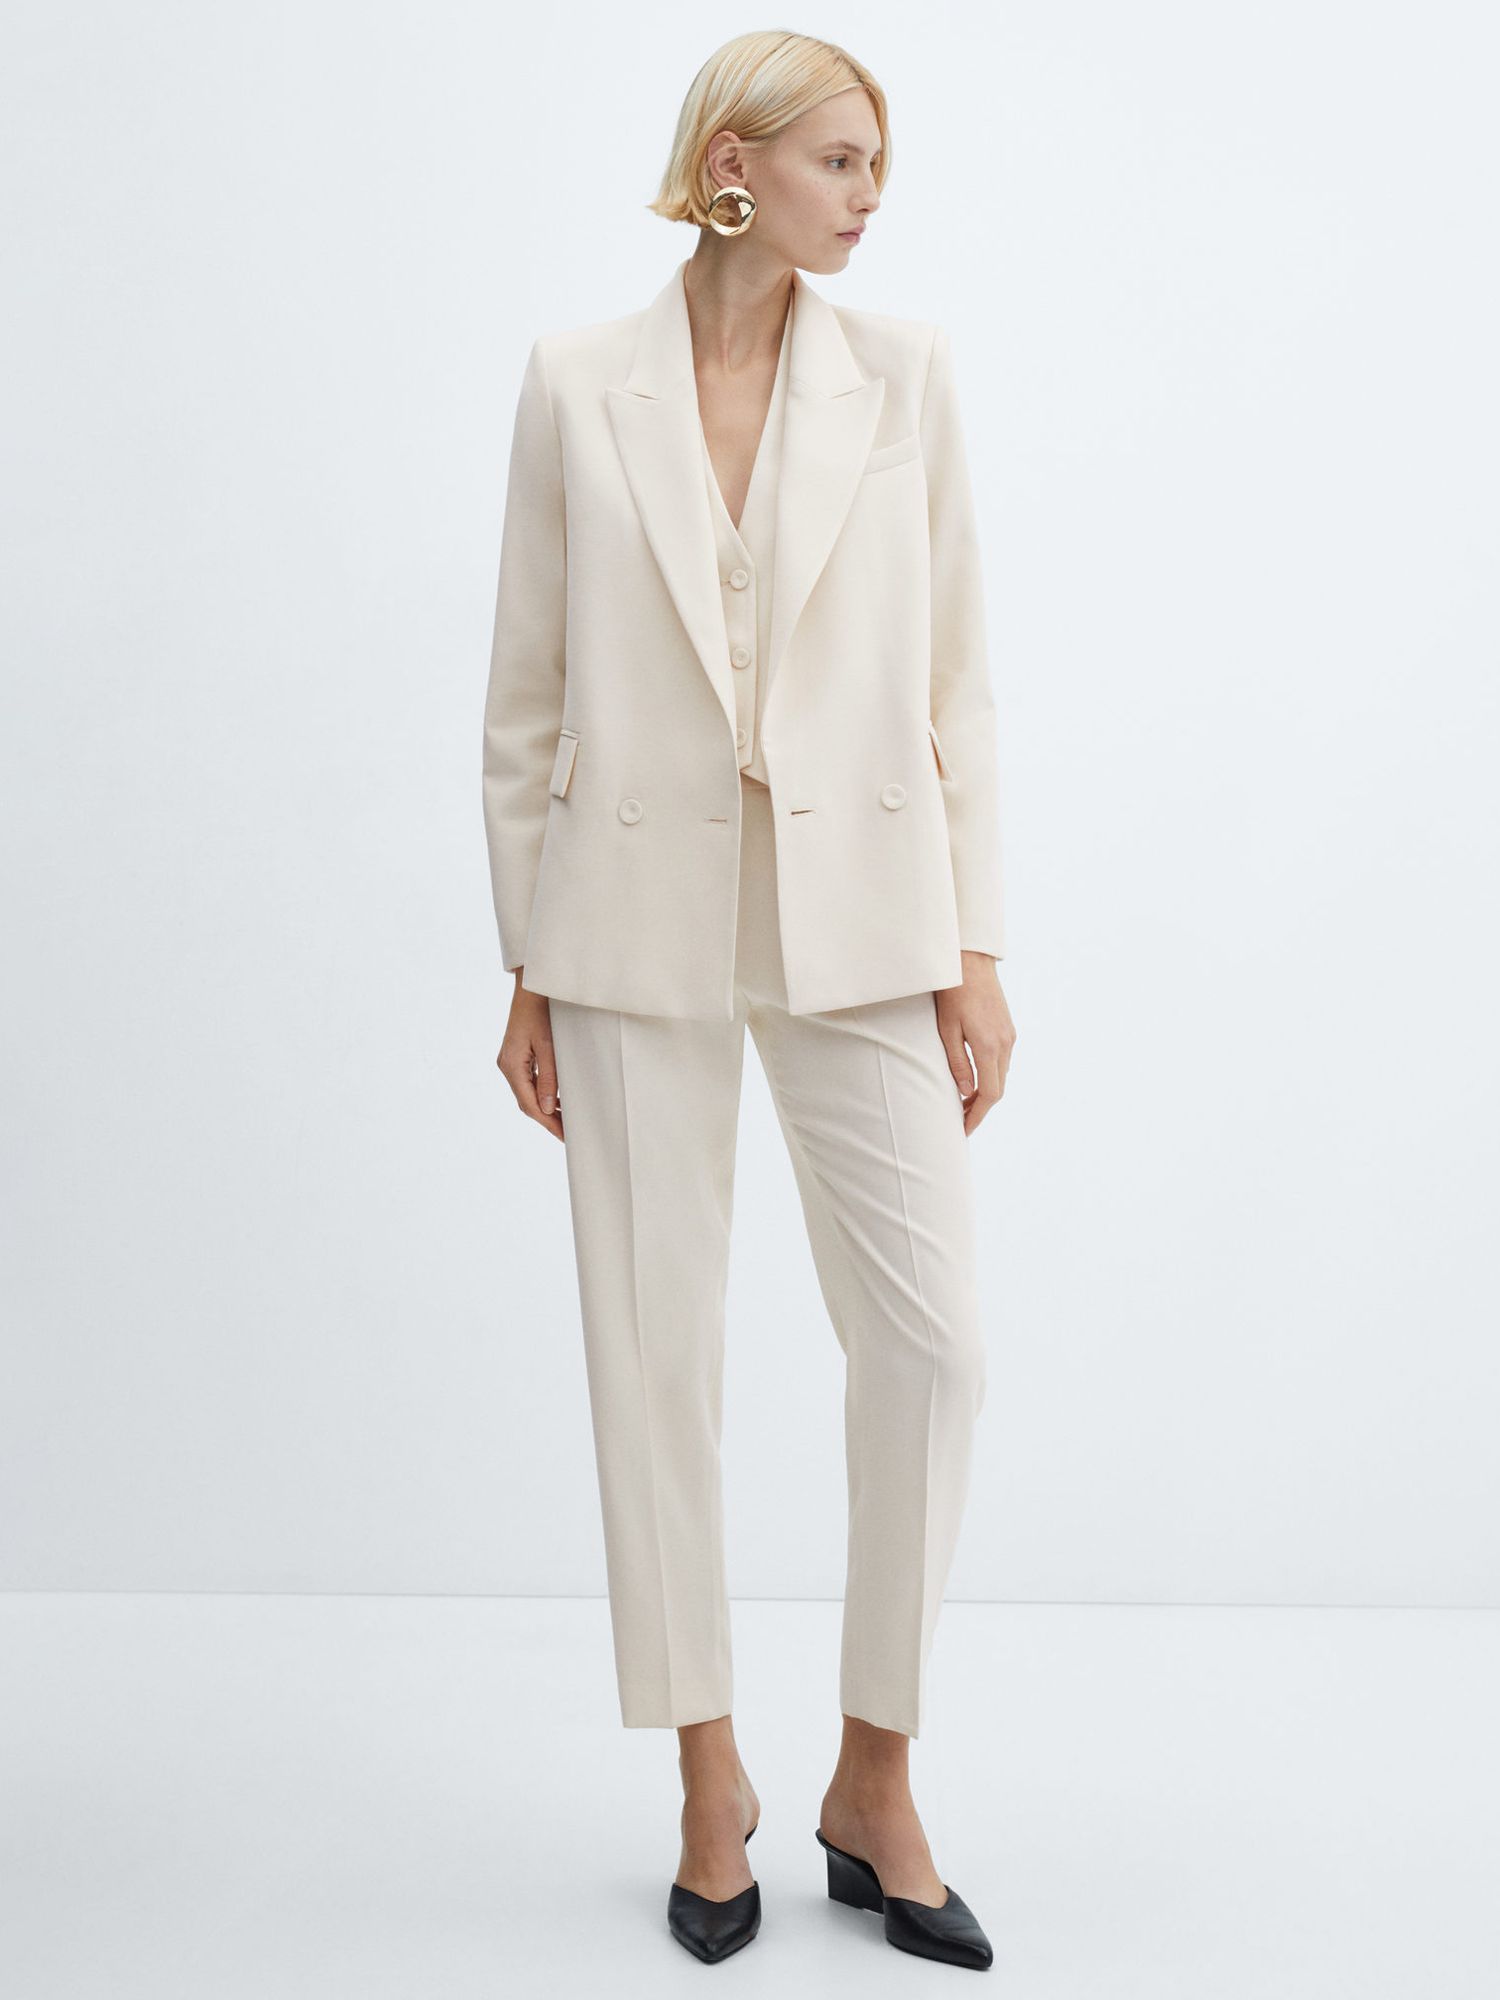 Mango Tempo Double Breasted Suit Blazer, Cream at John Lewis & Partners